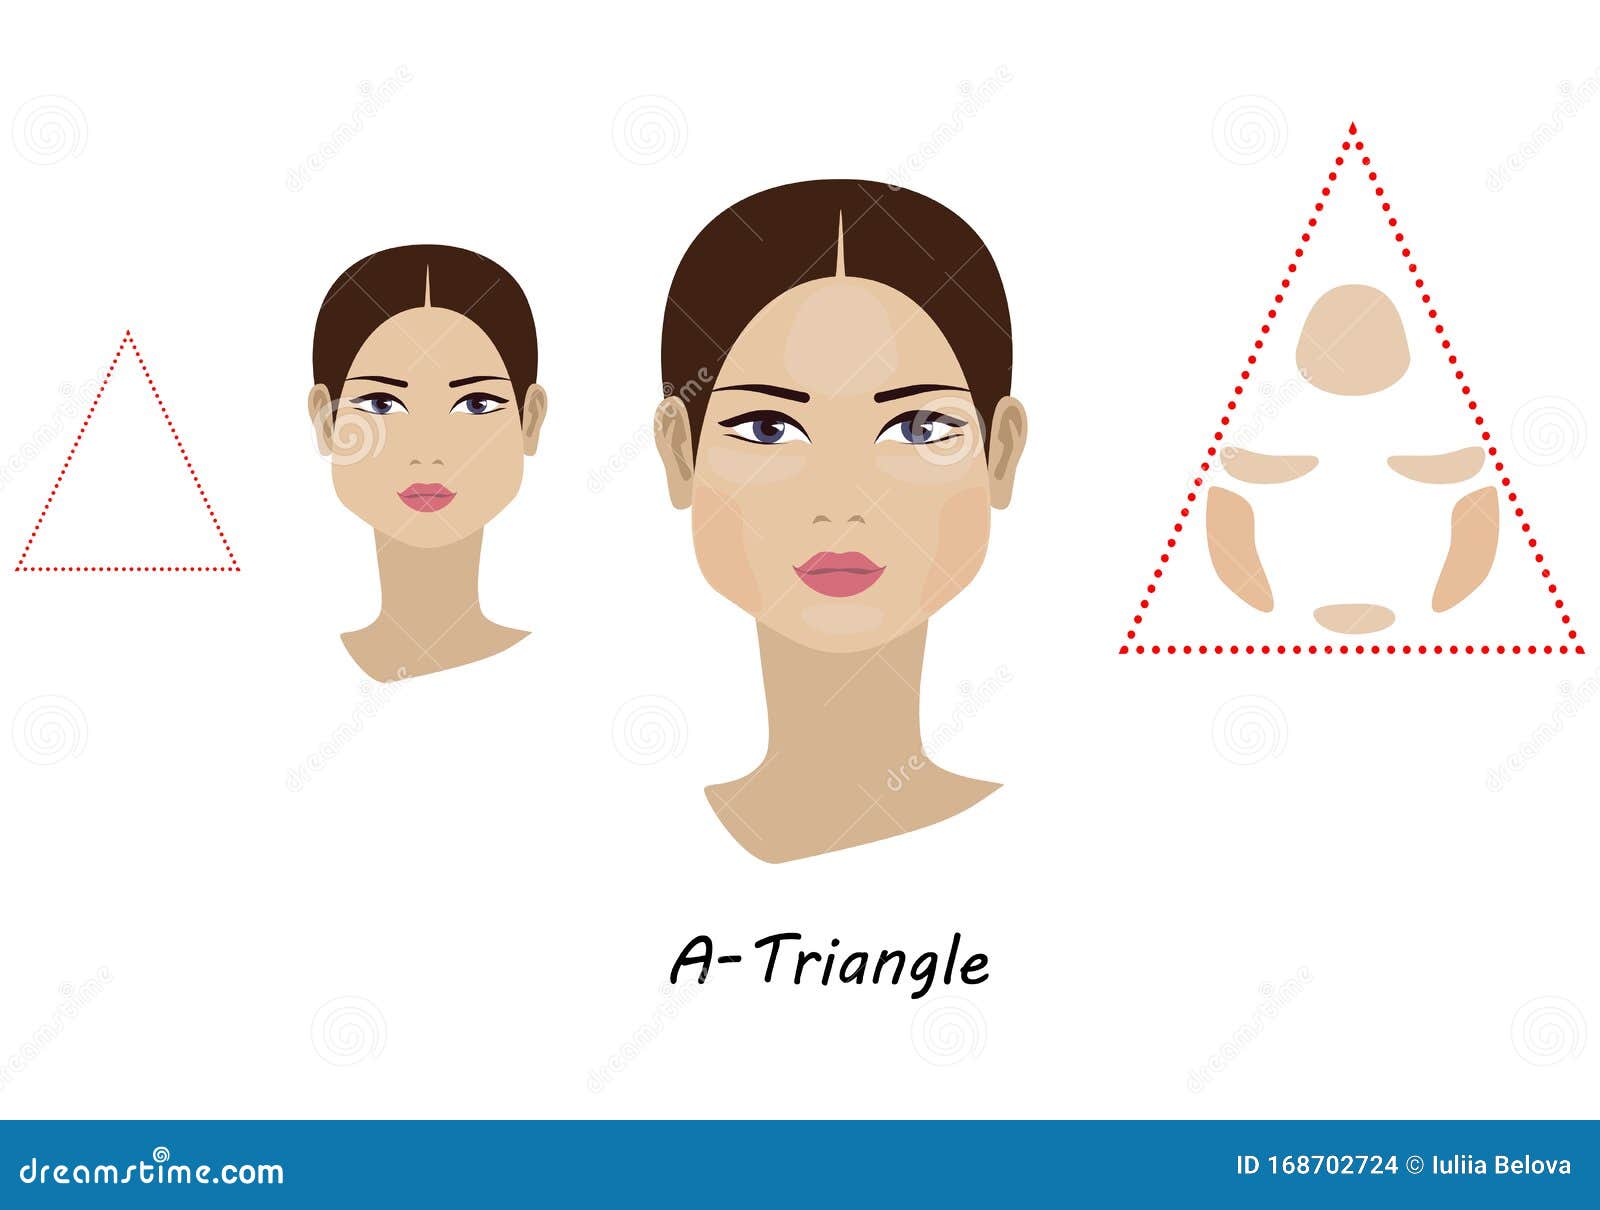 Contour and Makeup Highlights. Contour Shape of the Triangle Face Make-up.  Fashion Illustration Stock Illustration - Illustration of heart, graphic:  168702724